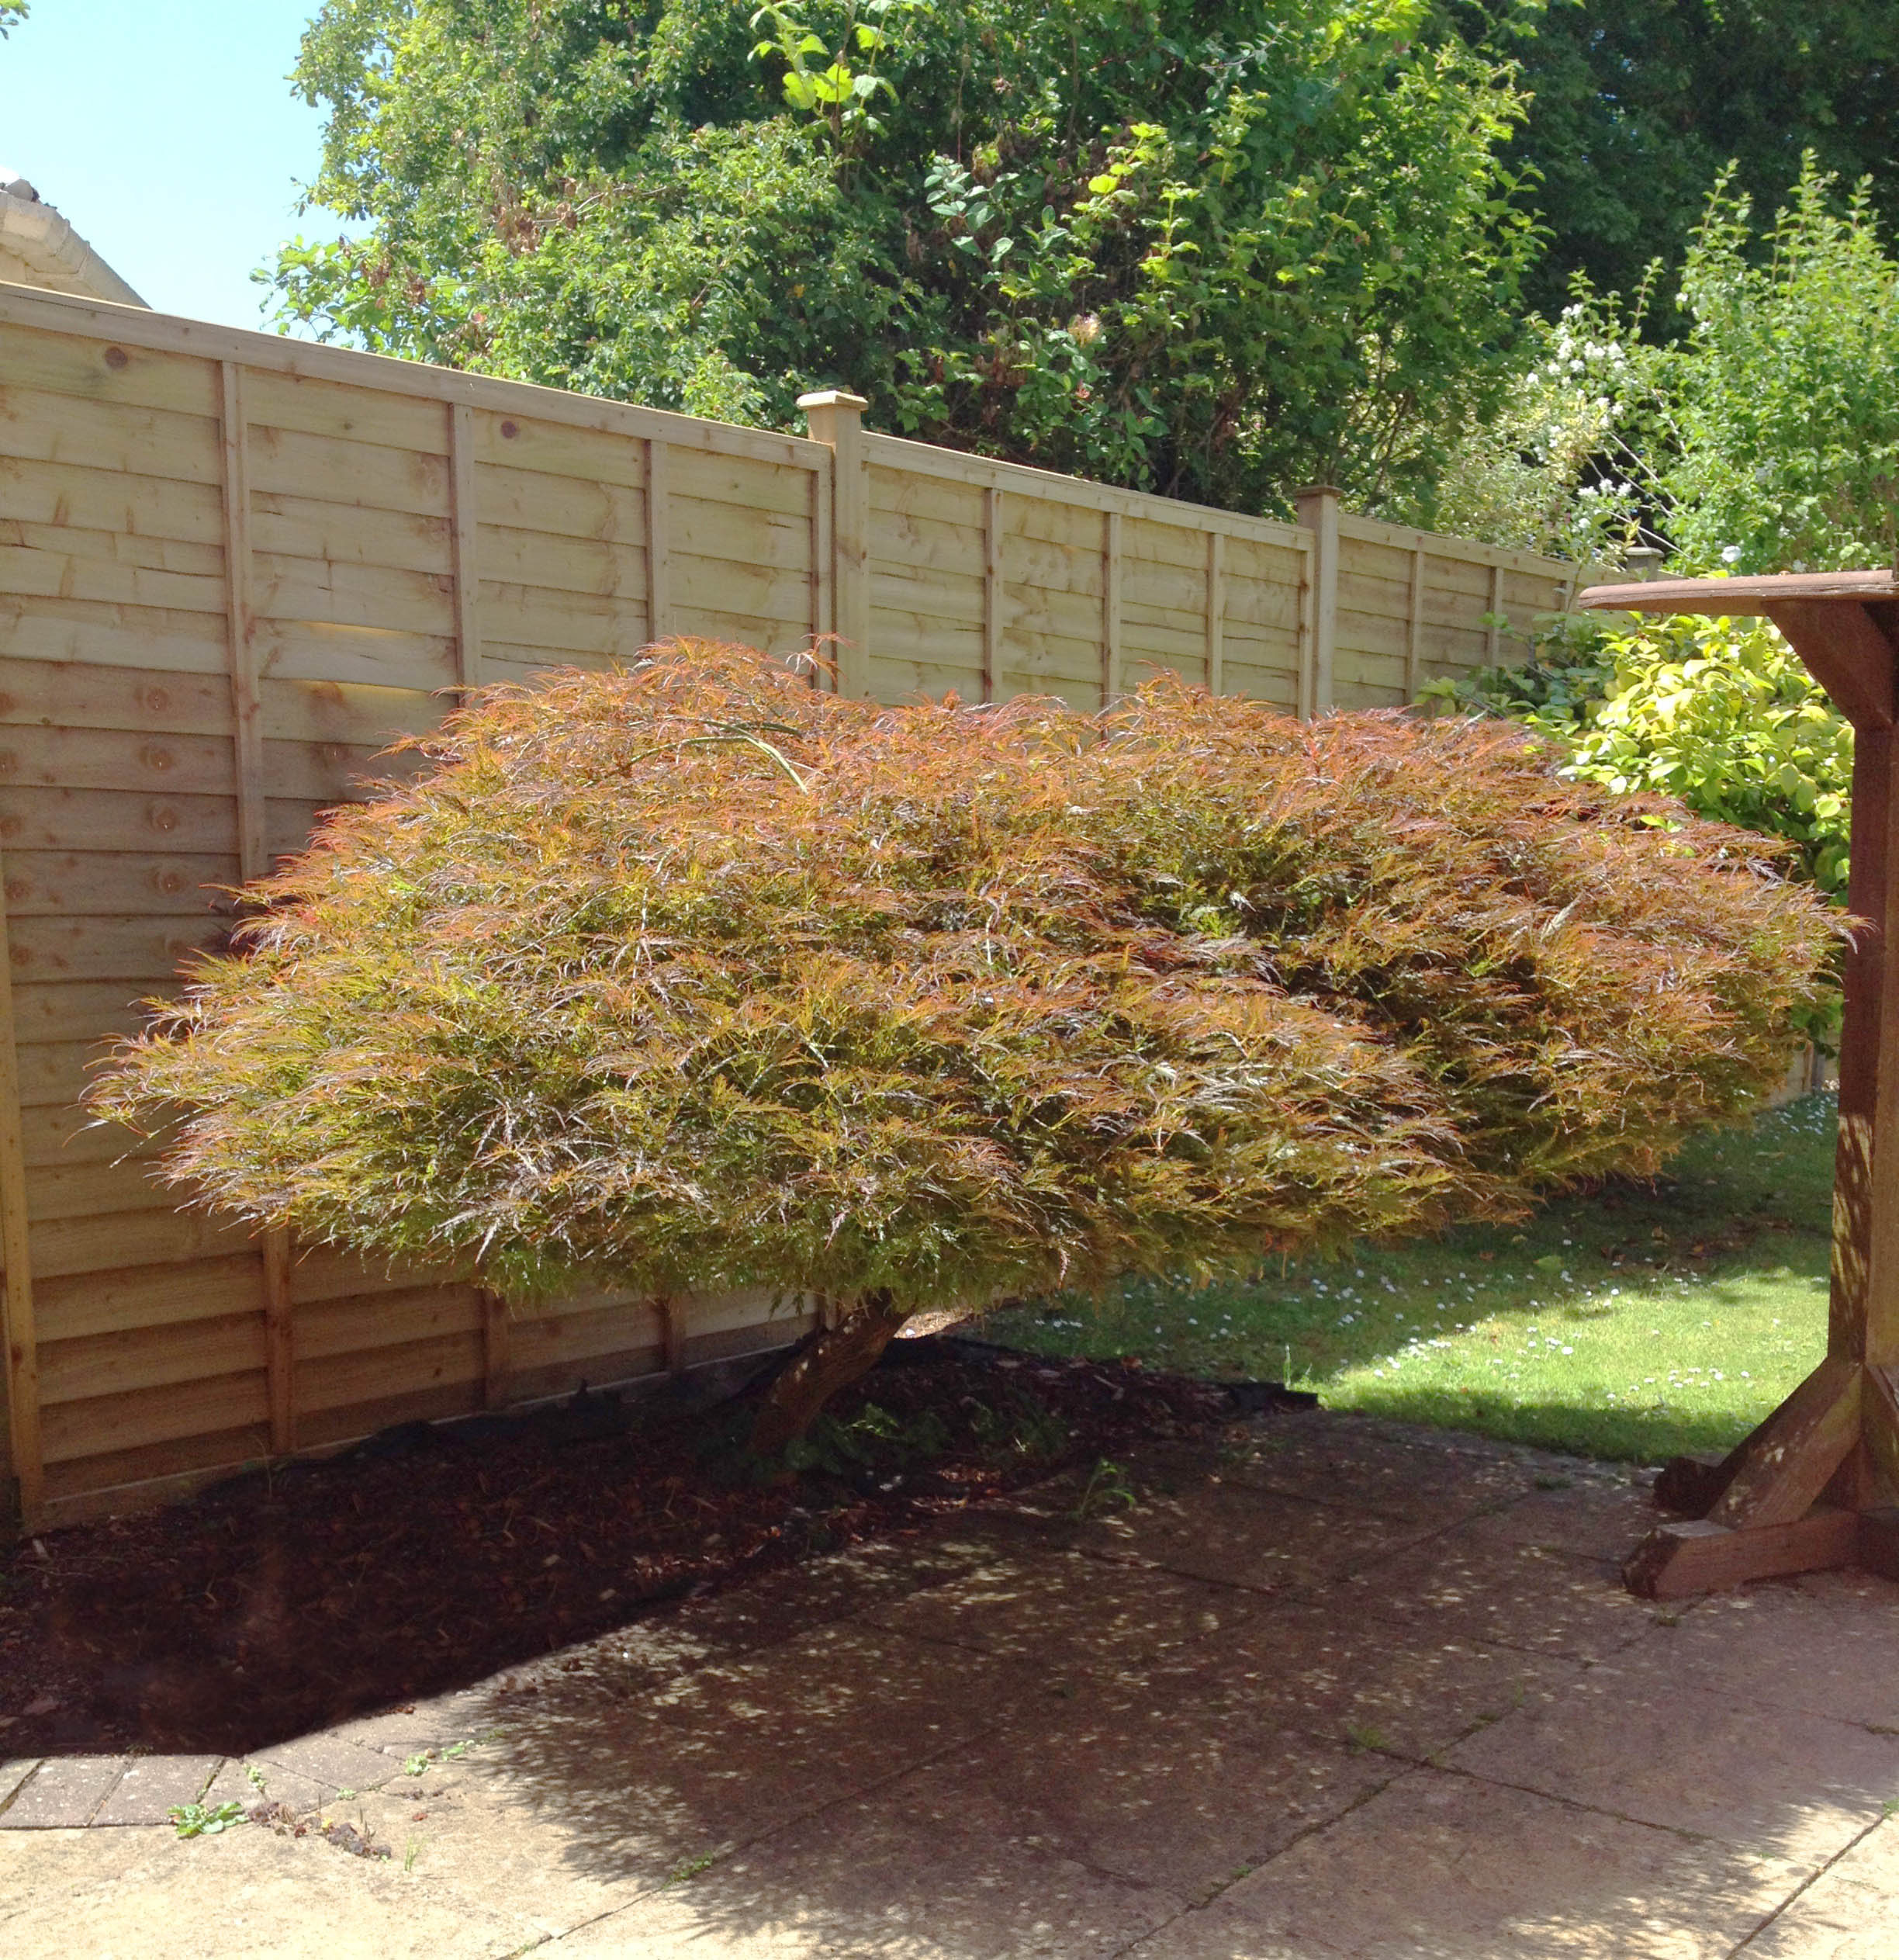 What can I do with this tree? - Page 1 - Homes, Gardens and DIY - PistonHeads